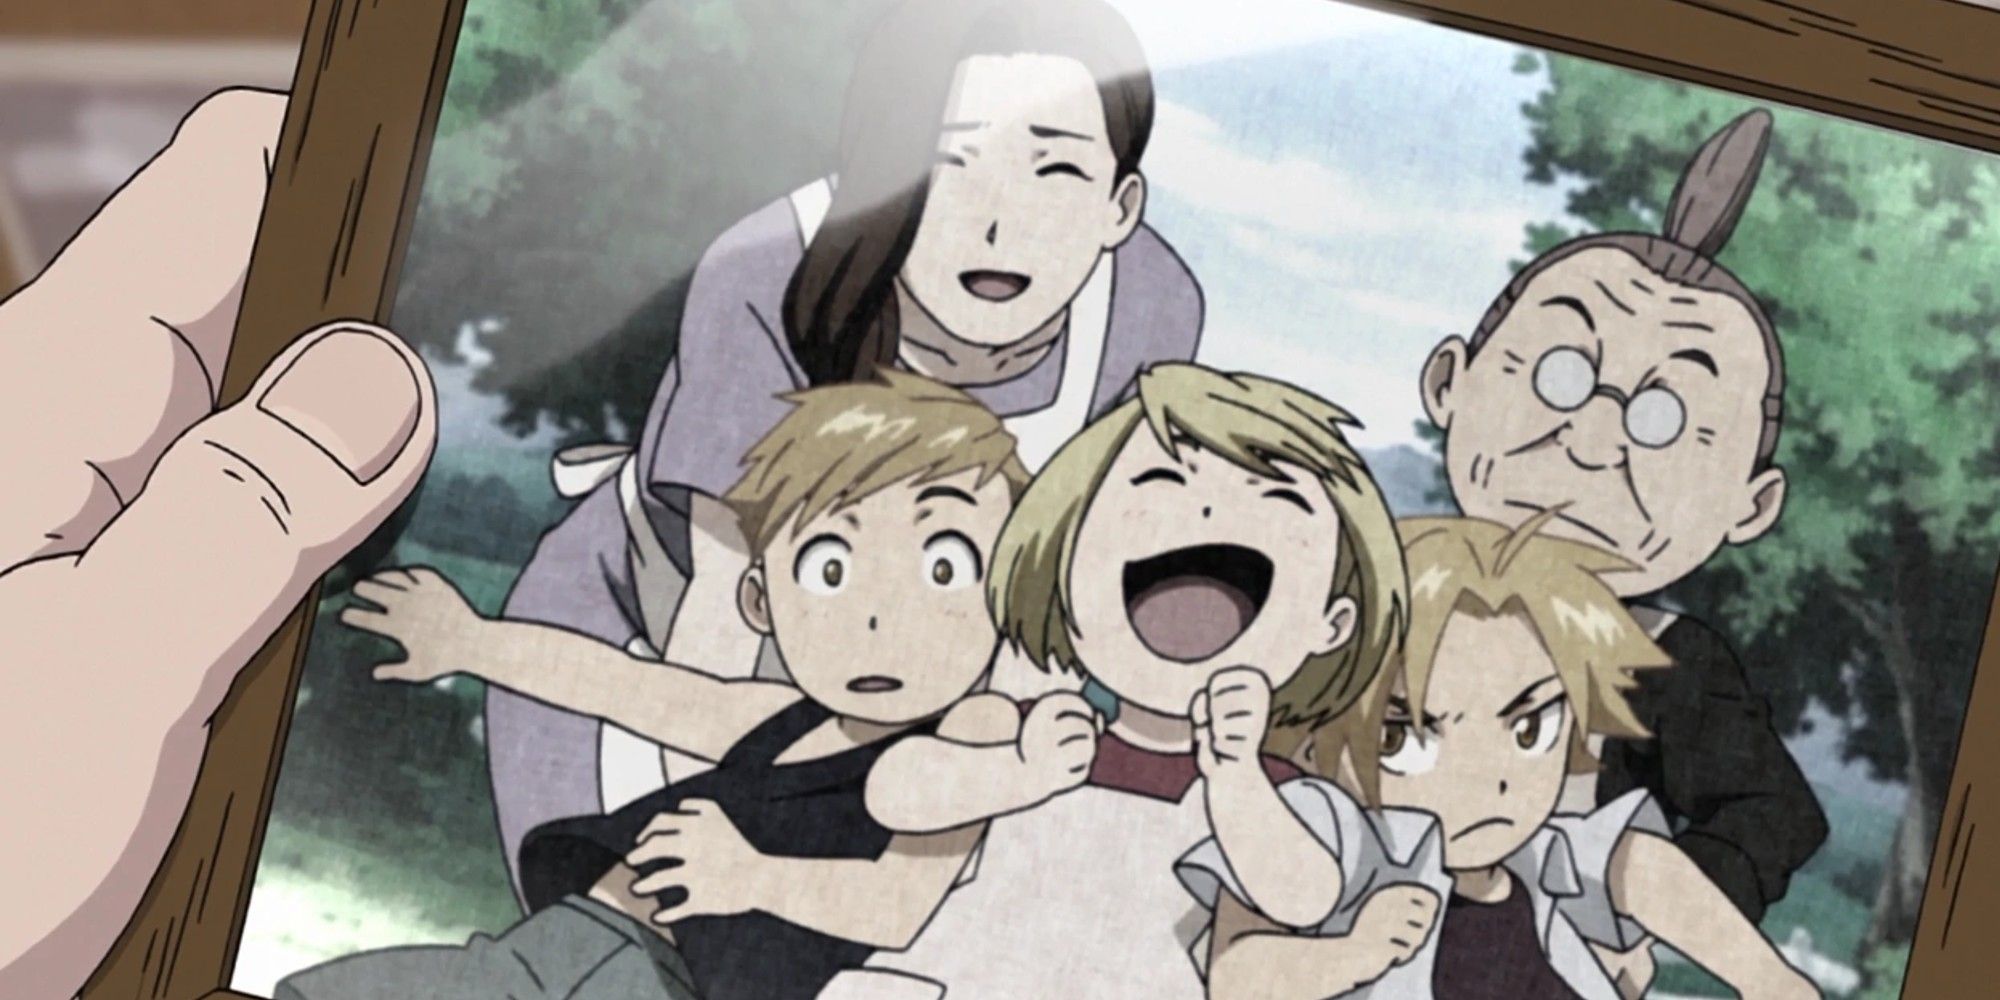 Old photo of Alphonse, Winry and Edward as children from Fullmetal Alchemist.